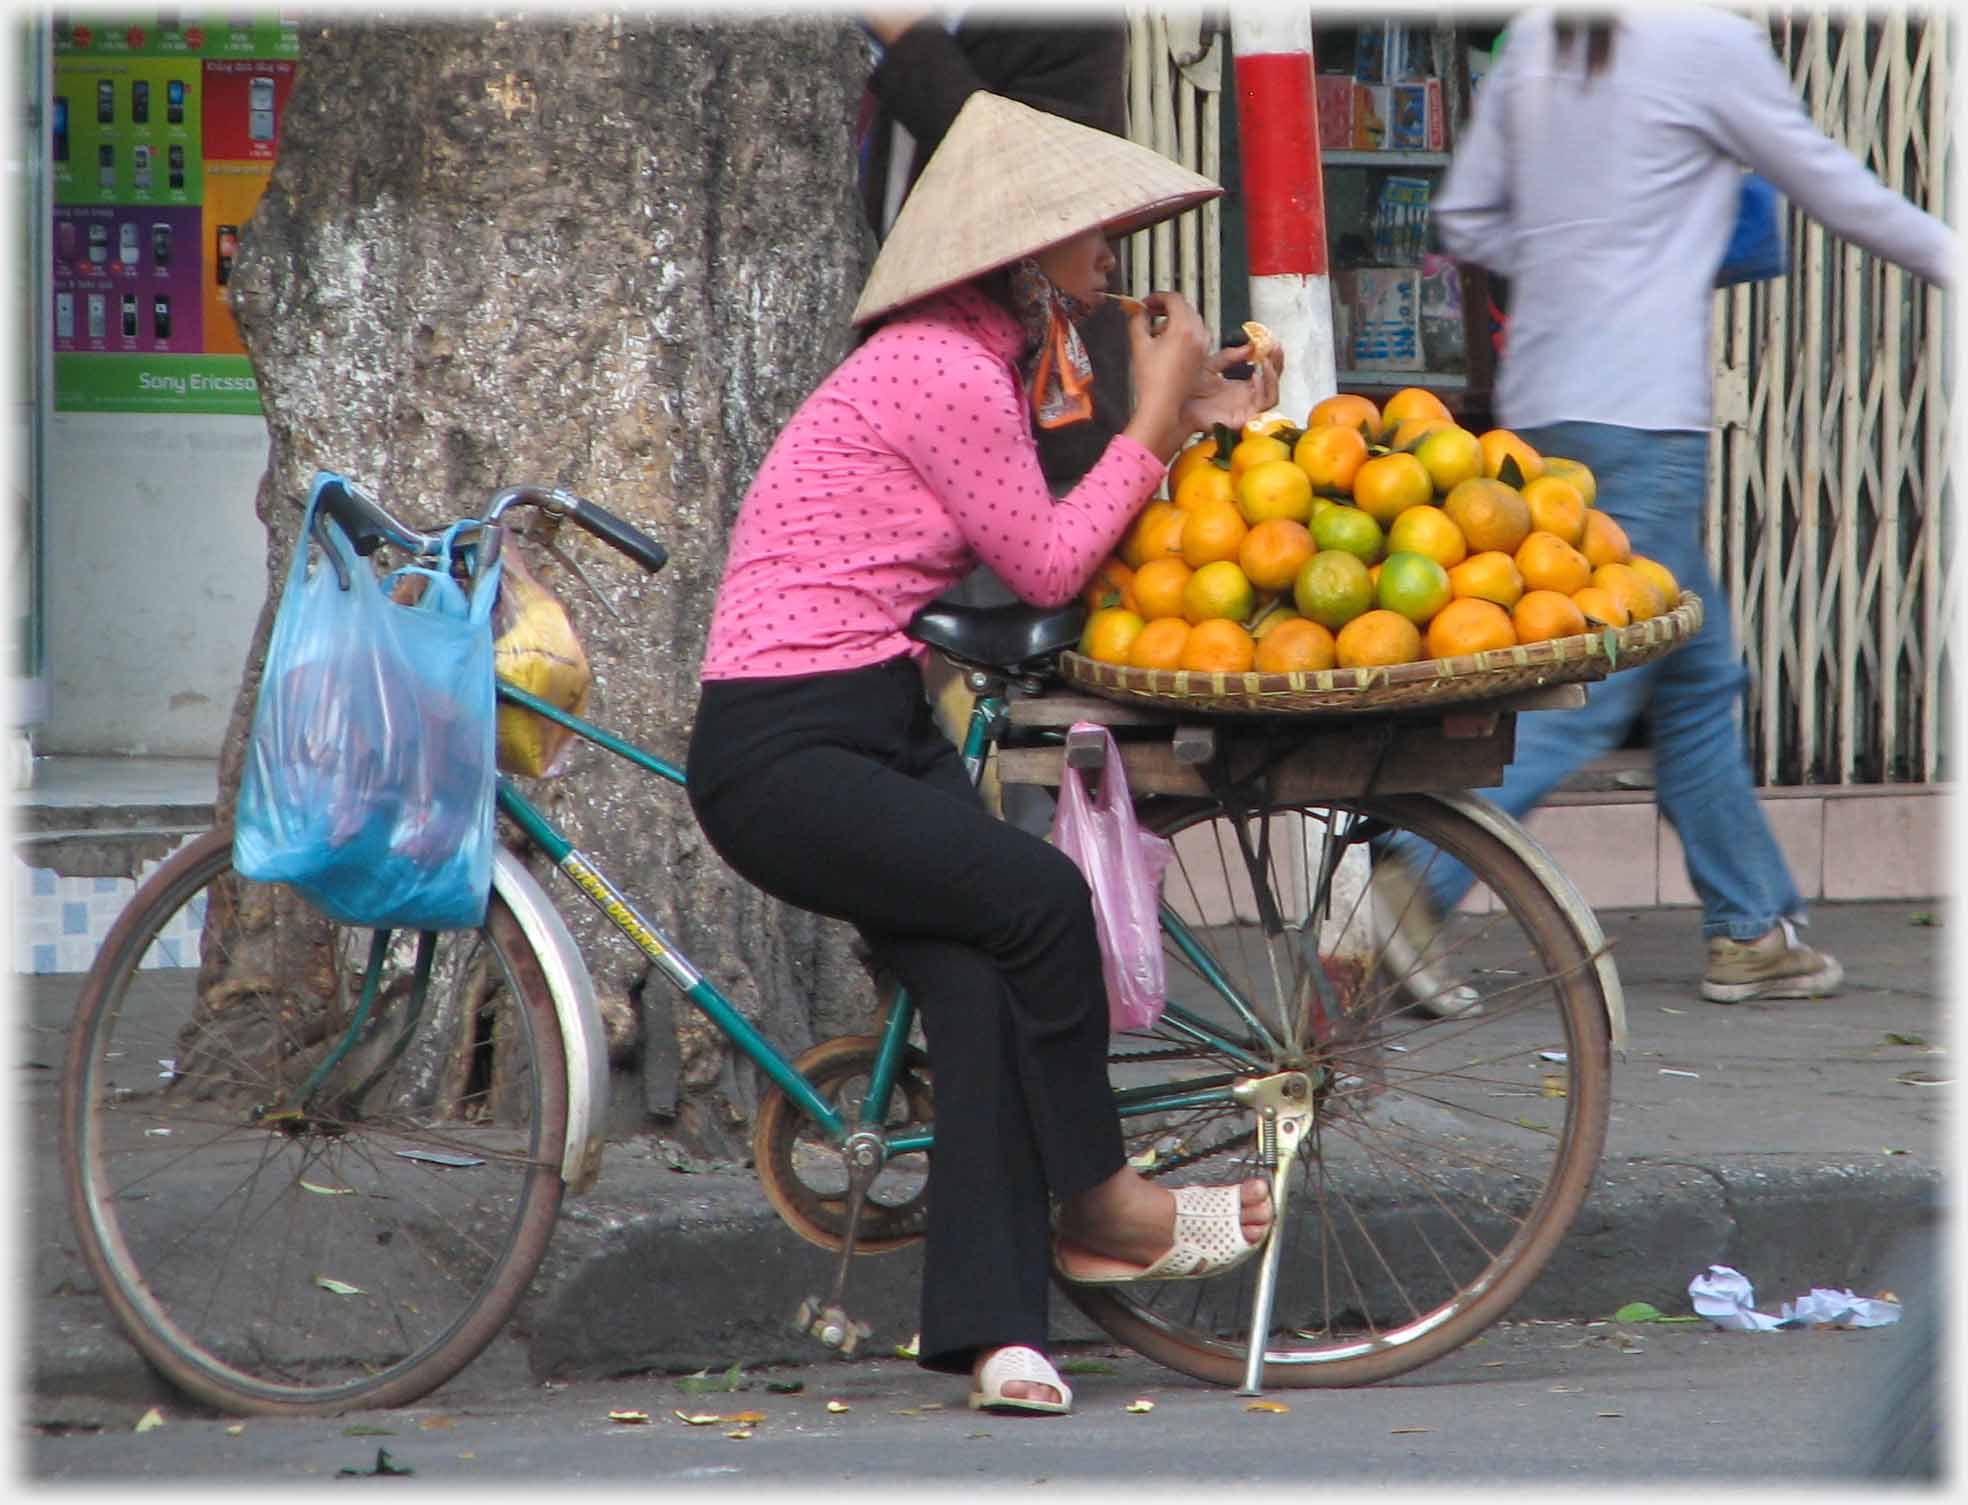 Woman sitting on bar of bike with pile of oranges, apparently eating.